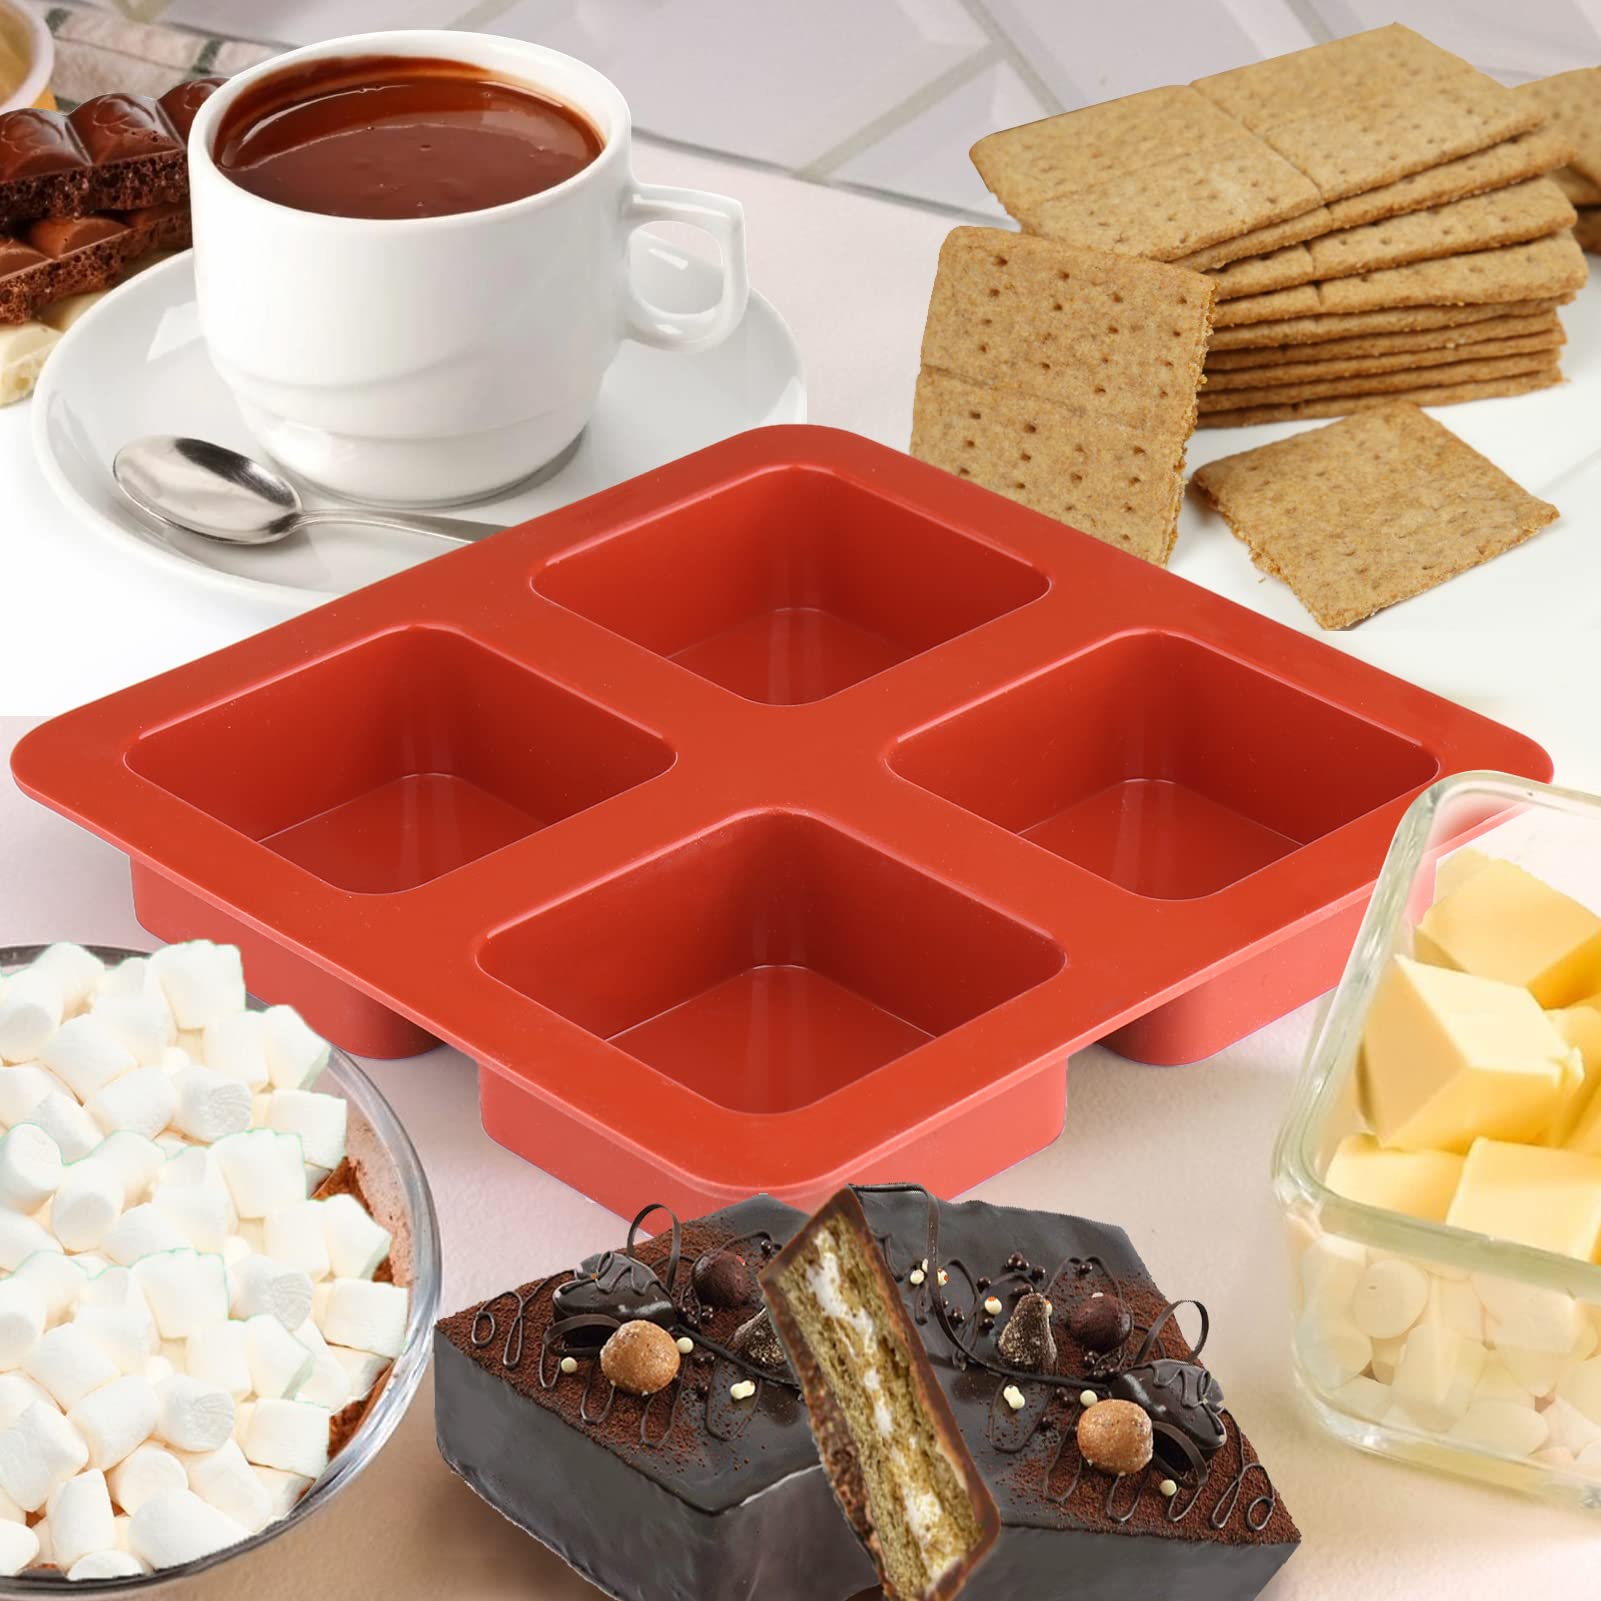 Cadeya 2 Pcs 4 Cavity Chocolate Covered Cookies Molds for S'mores, Square Silicone Mold for Smores, Graham Crackers, Marshmallow